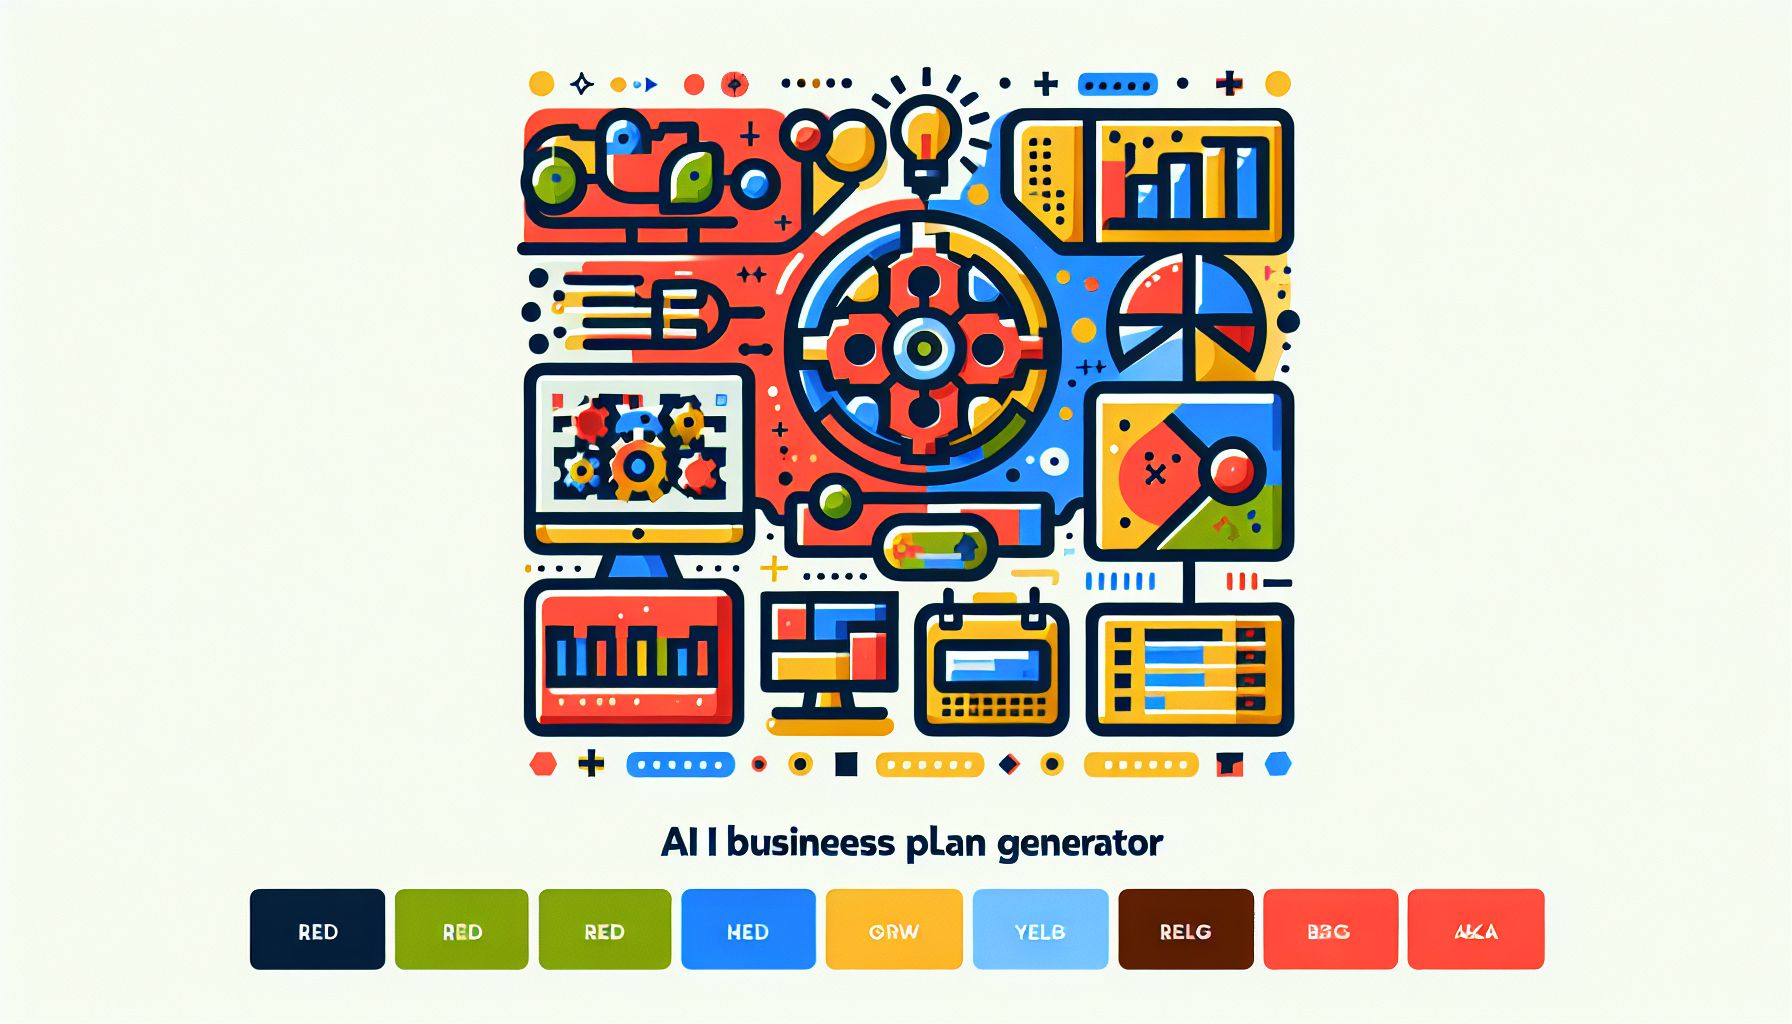 AI Business Plan Generator in flat illustration style and white background, red #f47574, green #88c7a8, yellow #fcc44b, and blue #645bc8 colors.